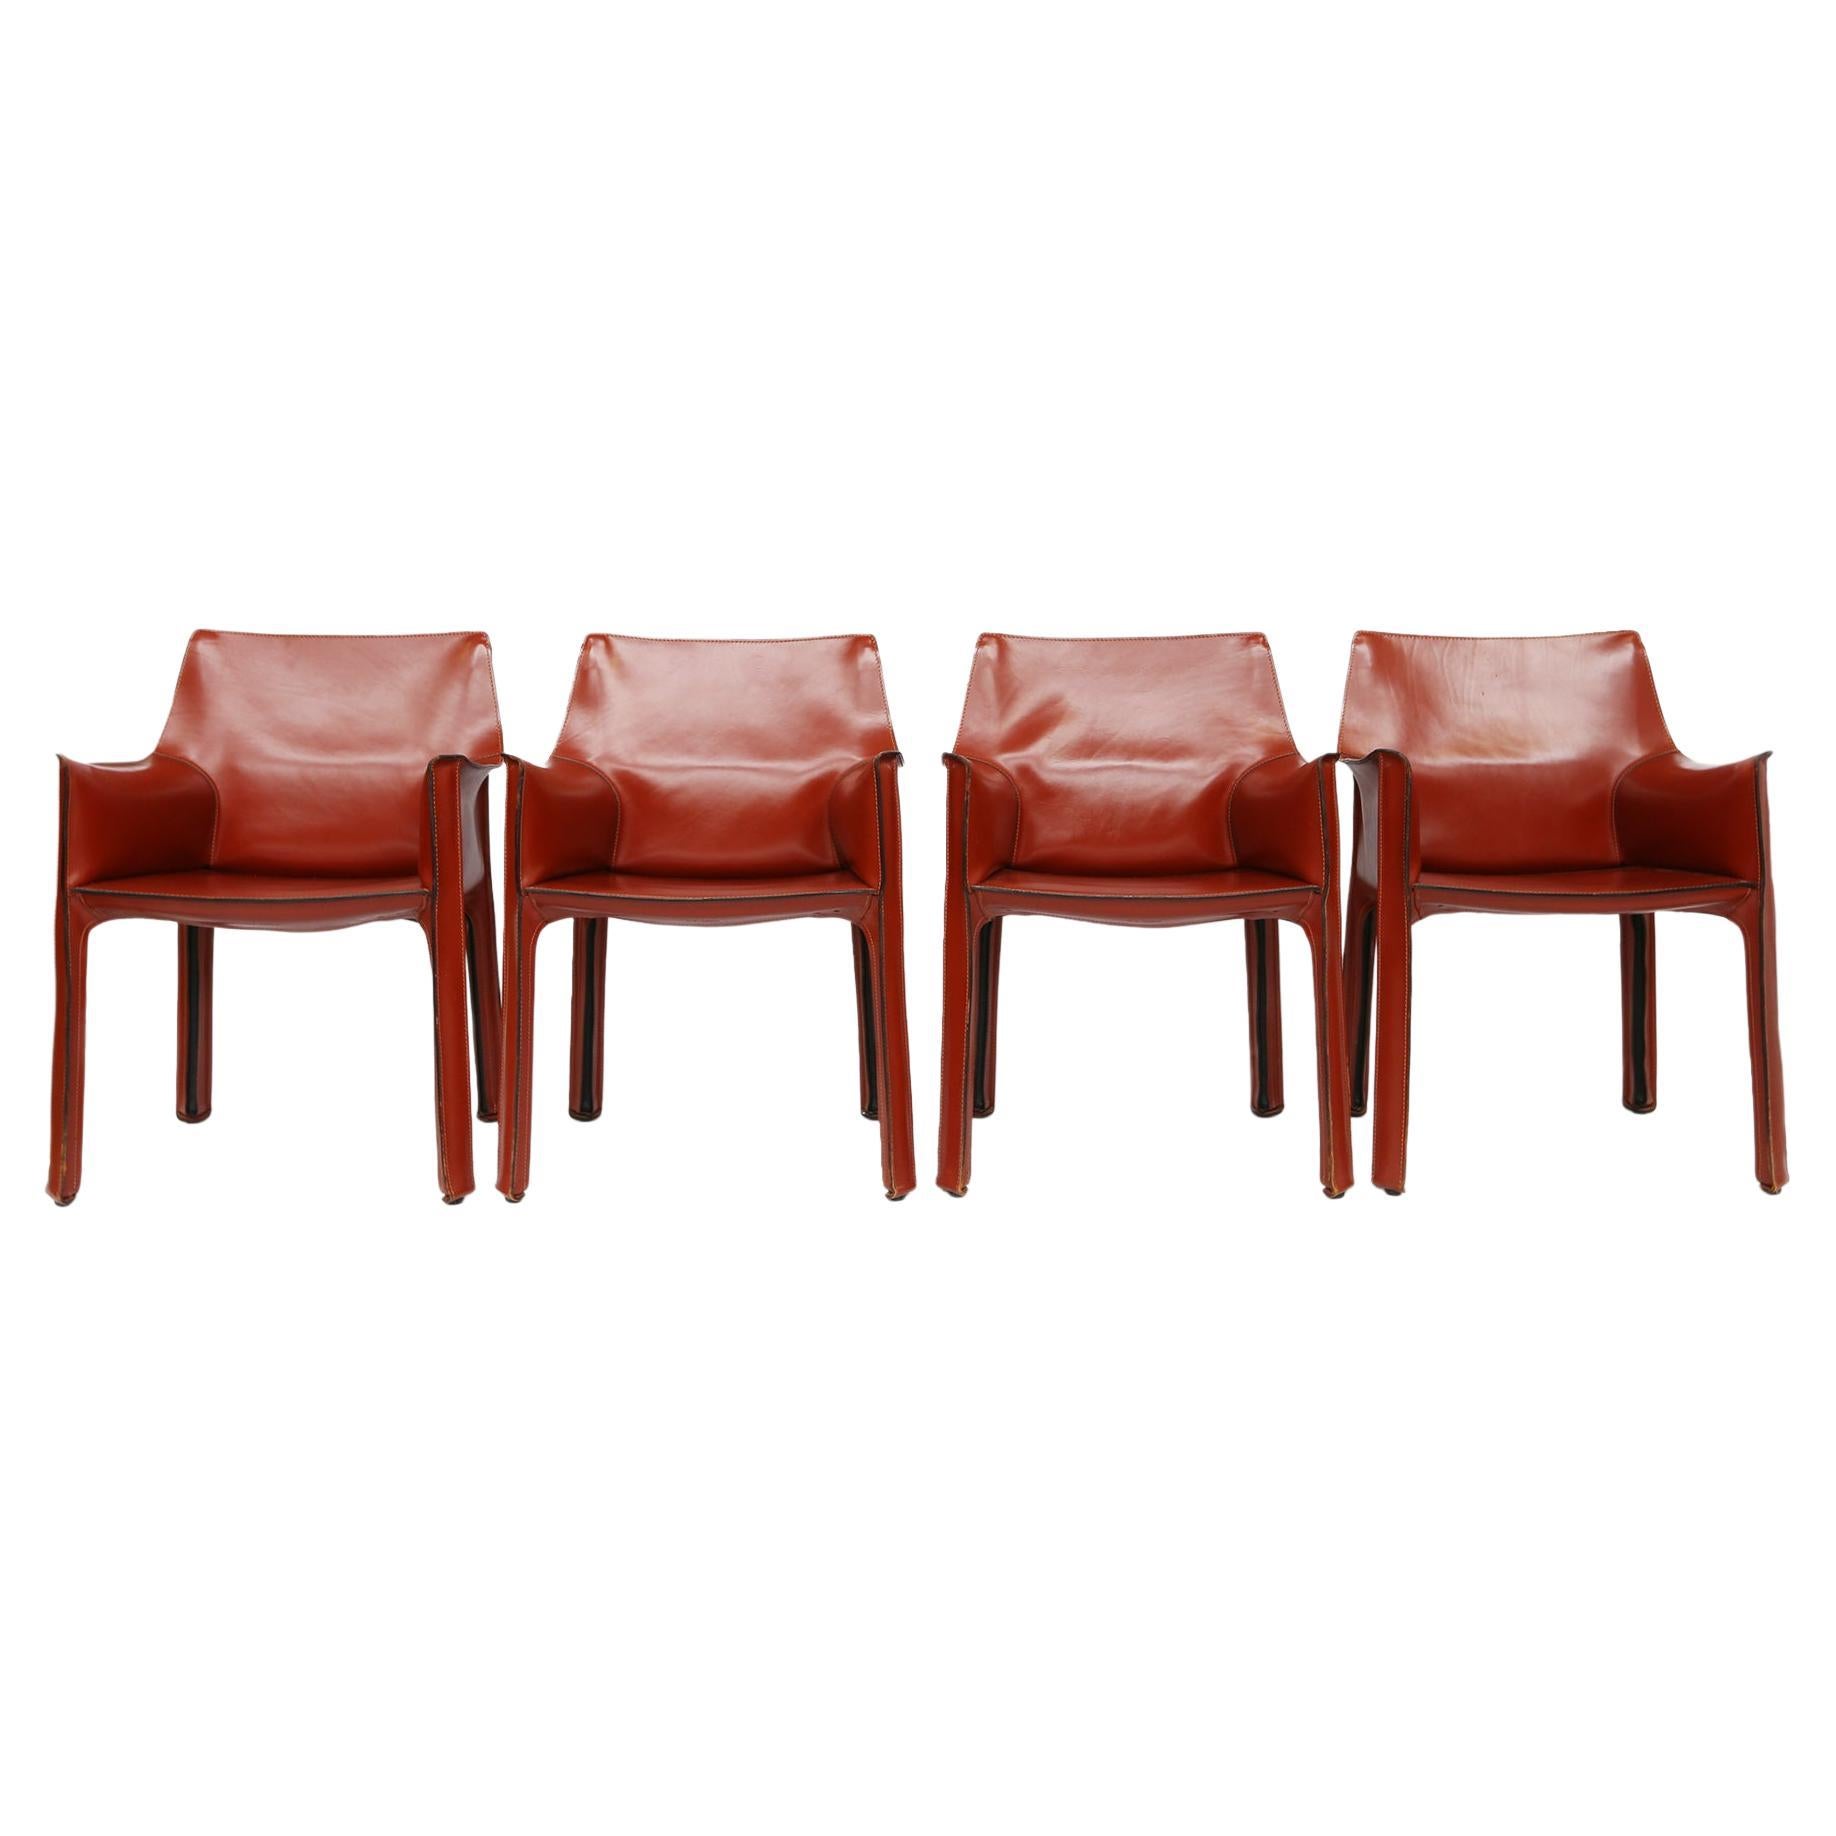 Set of 4 Cab 413 Armchairs by Mario Bellini for Cassina For Sale